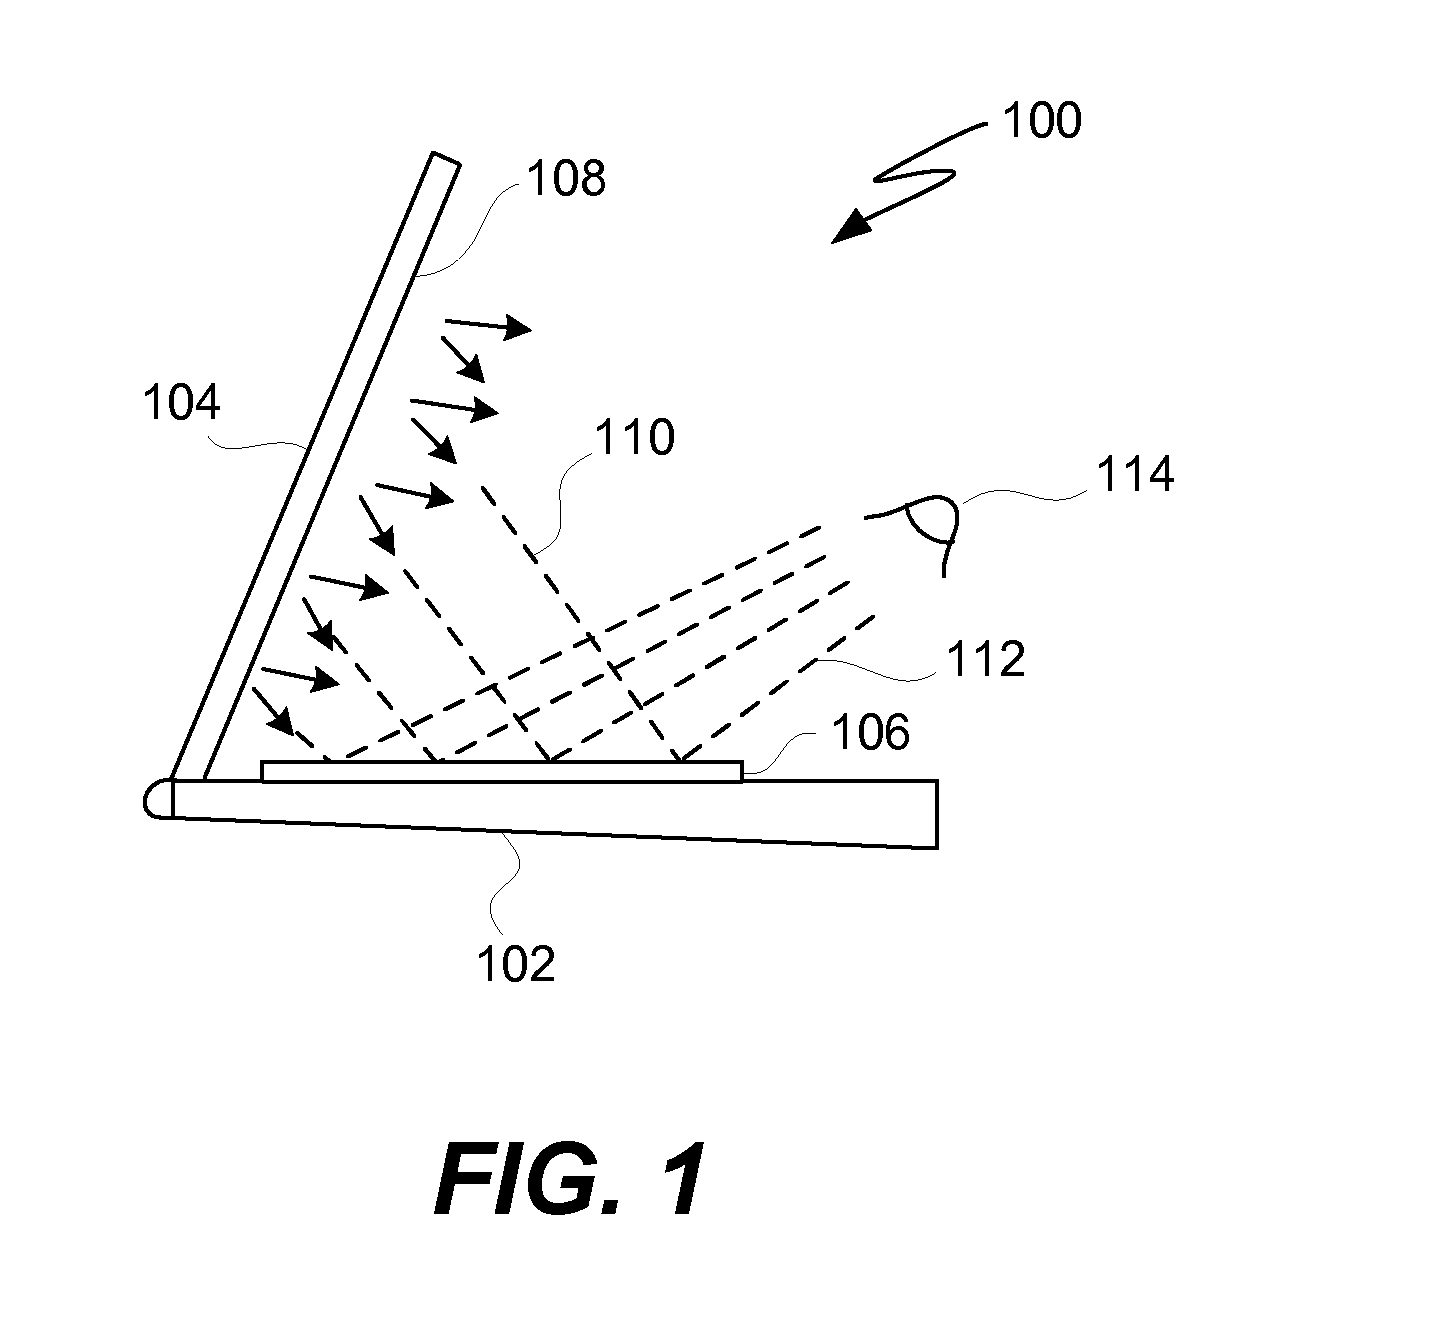 Method and Apparatus for Enhancing Keycap Legend Visibility in Low Light Conditions